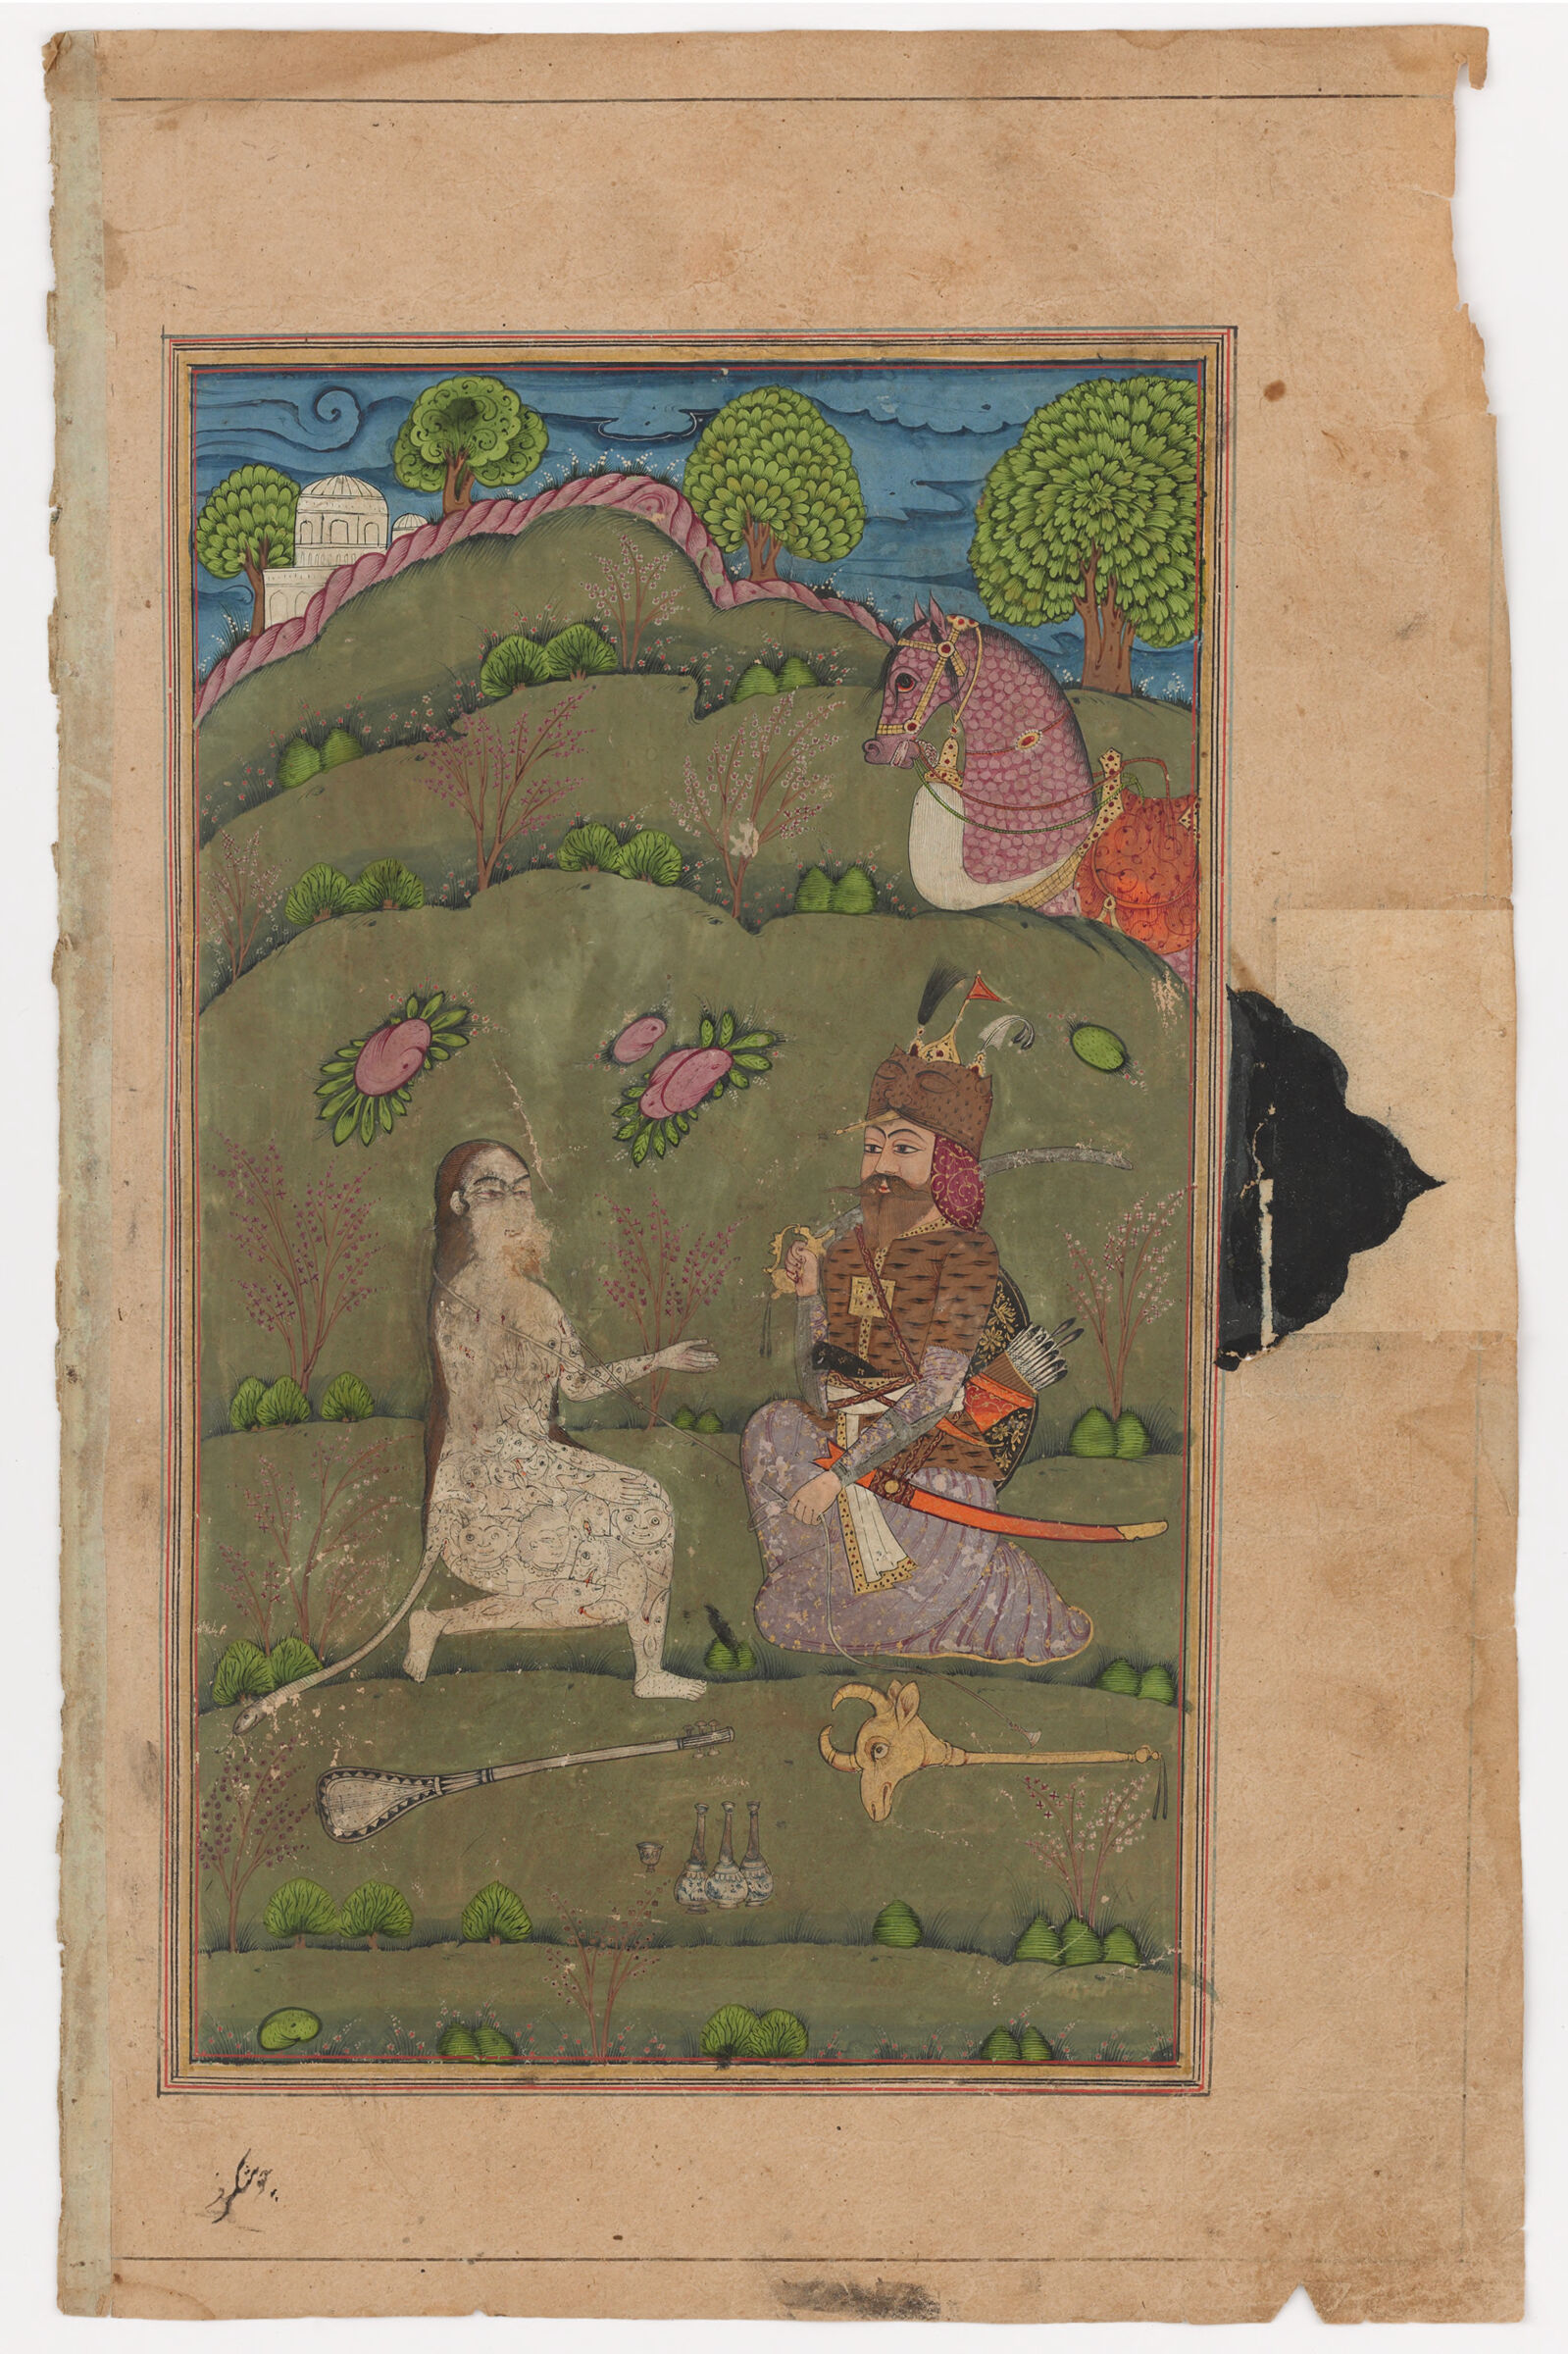 Rustam's Third Trial: Combat With A Dragon (Painting Recto), Rustam’s Fourth Trial: He Kills A Witch (Painting Verso)